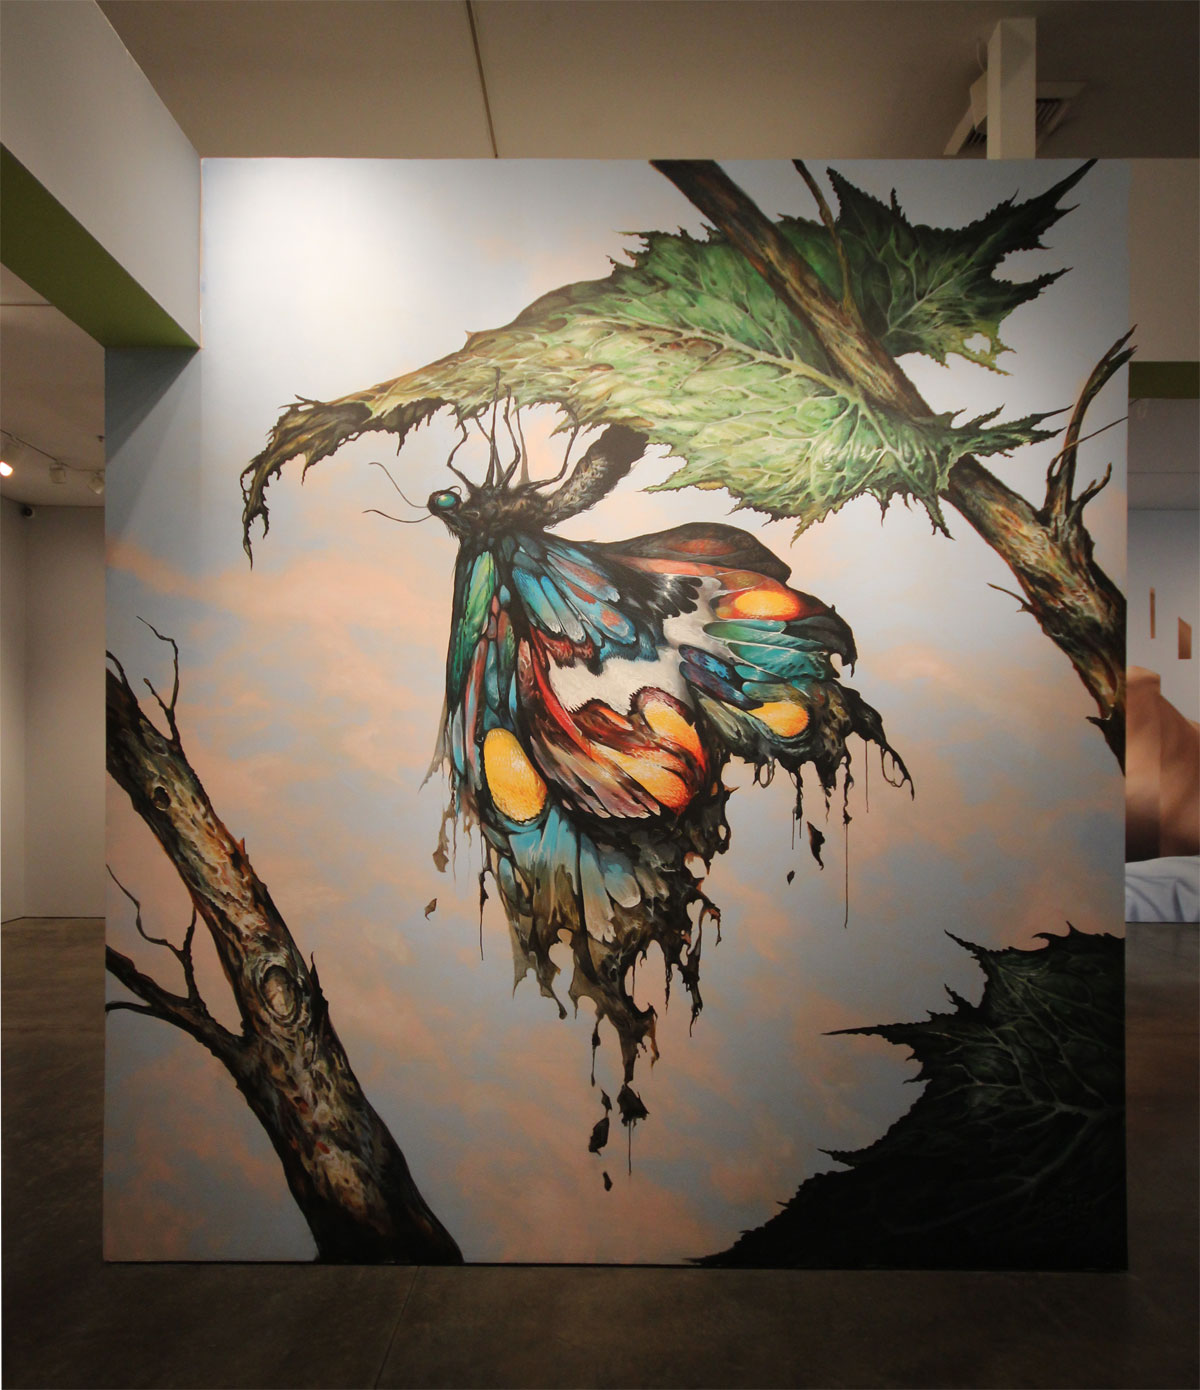 esao andrews long beach museum of art vitality and verve